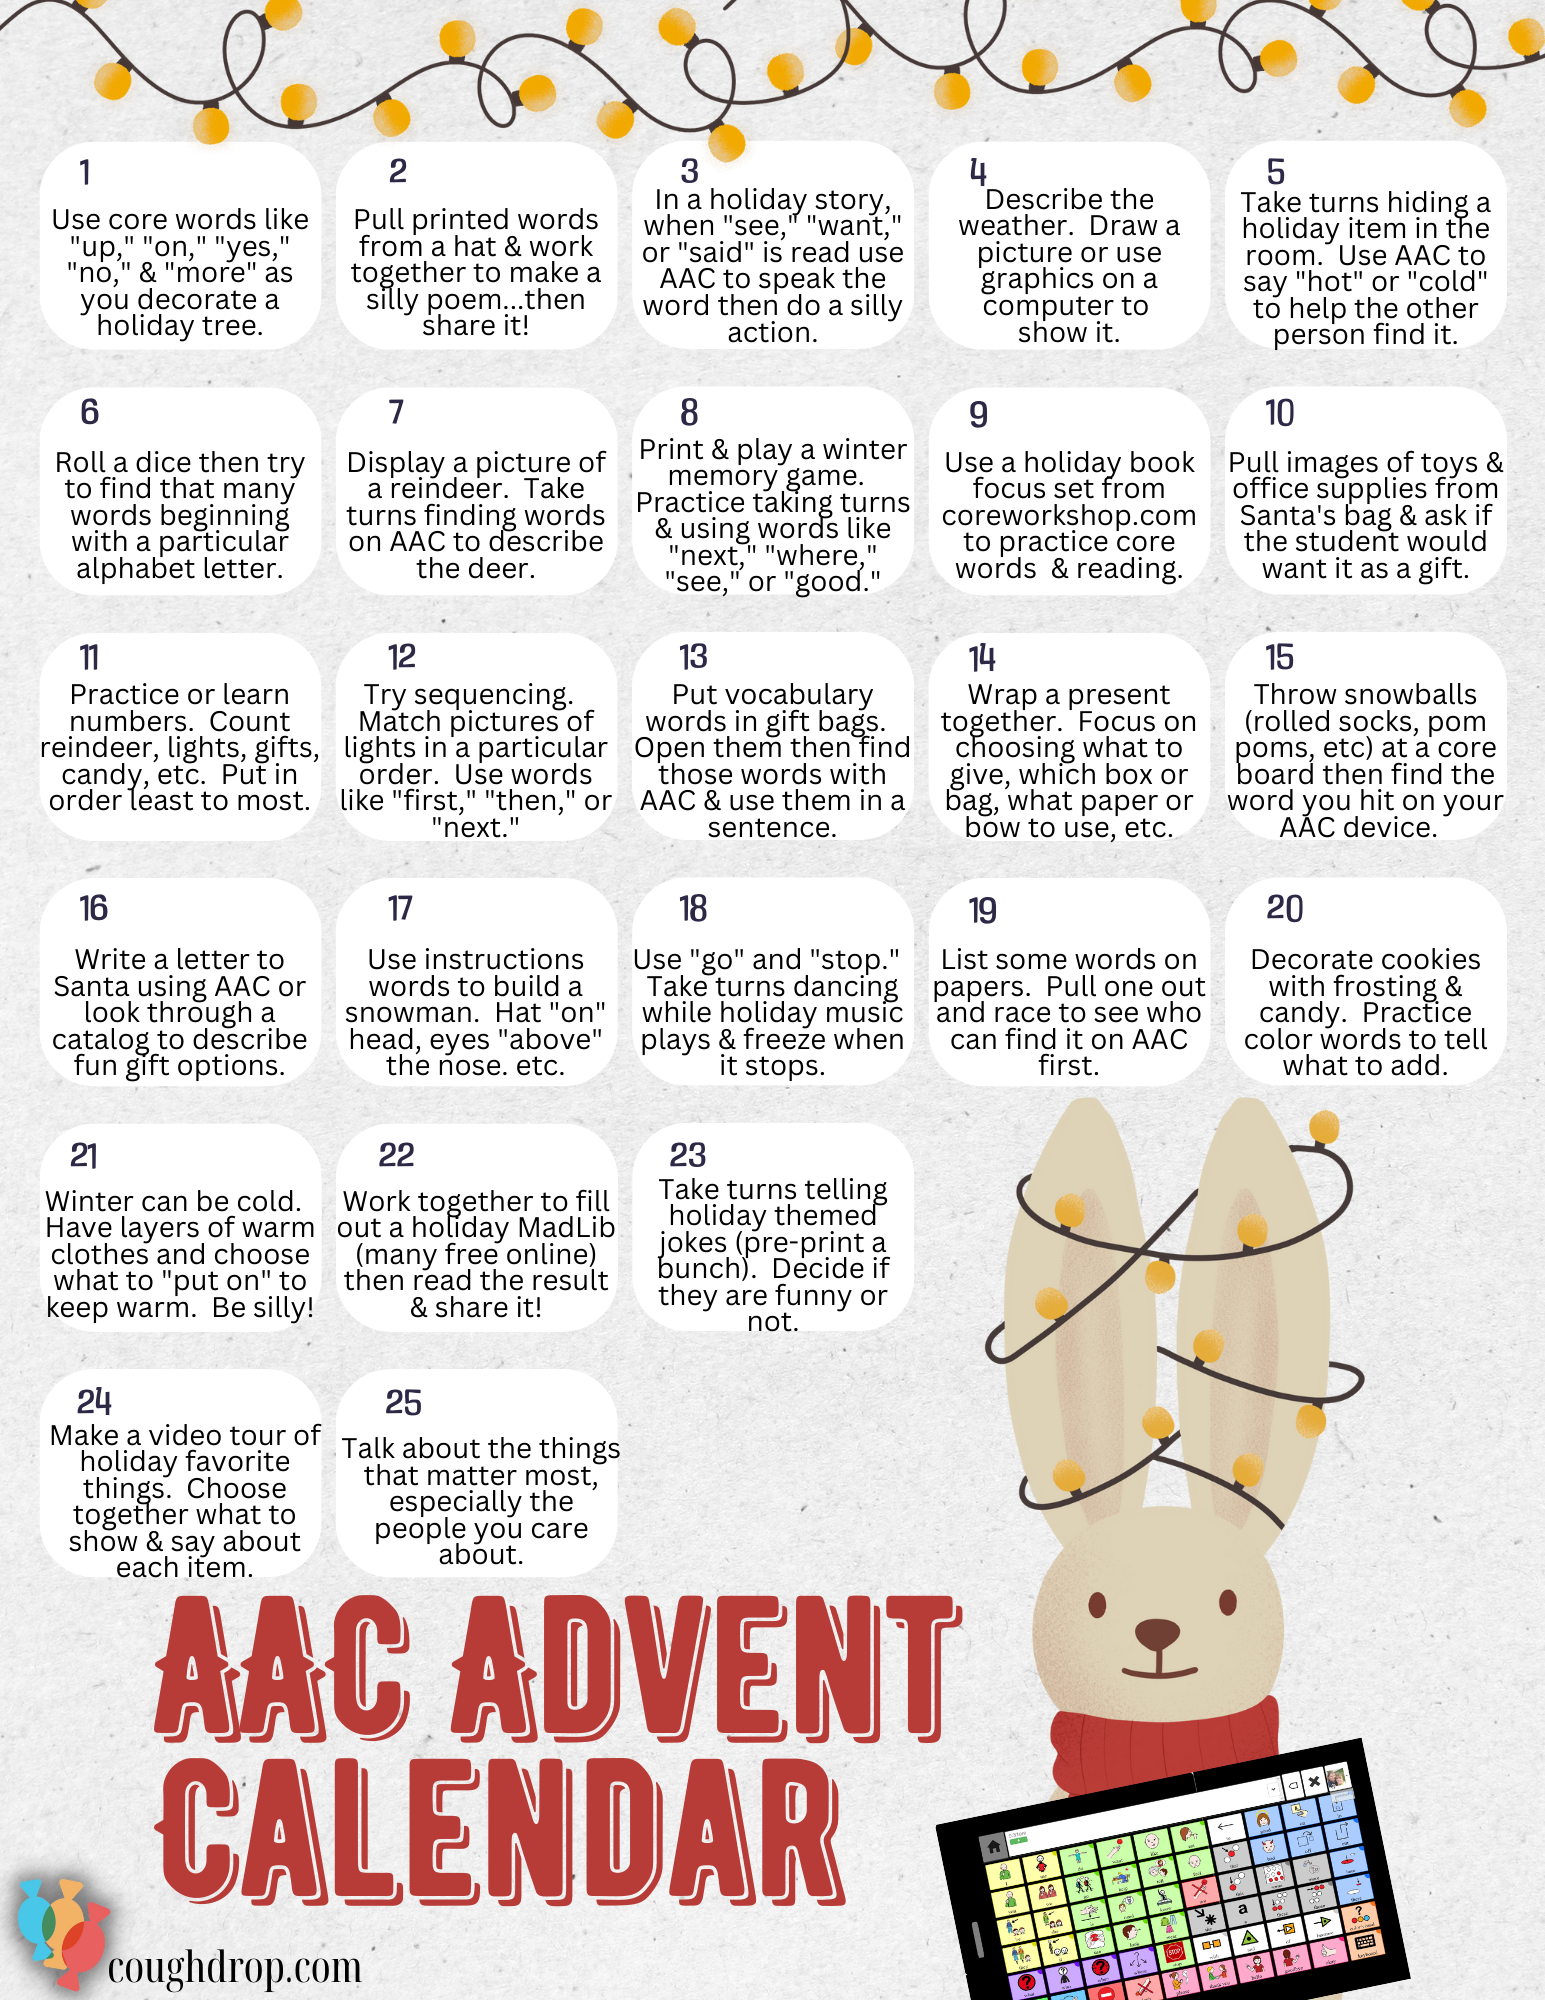 String of lights across the top of the page.  At the bottom the title in red reads "AAC Advent Calendar".  Next to that is a cream colored rabbit with tall ears that have lights strung around them.  The rabbit has a red scarf and is holding an AAC device with a core word speech board showing.  In the bottom left corner is the CoughDrop logo and the notation coughdrop.com.  The body of the image is a calendar type set of blocks in rows of five labeled 1-25.  Each block describes a simple, holiday-themed activity to support AAC learning.  